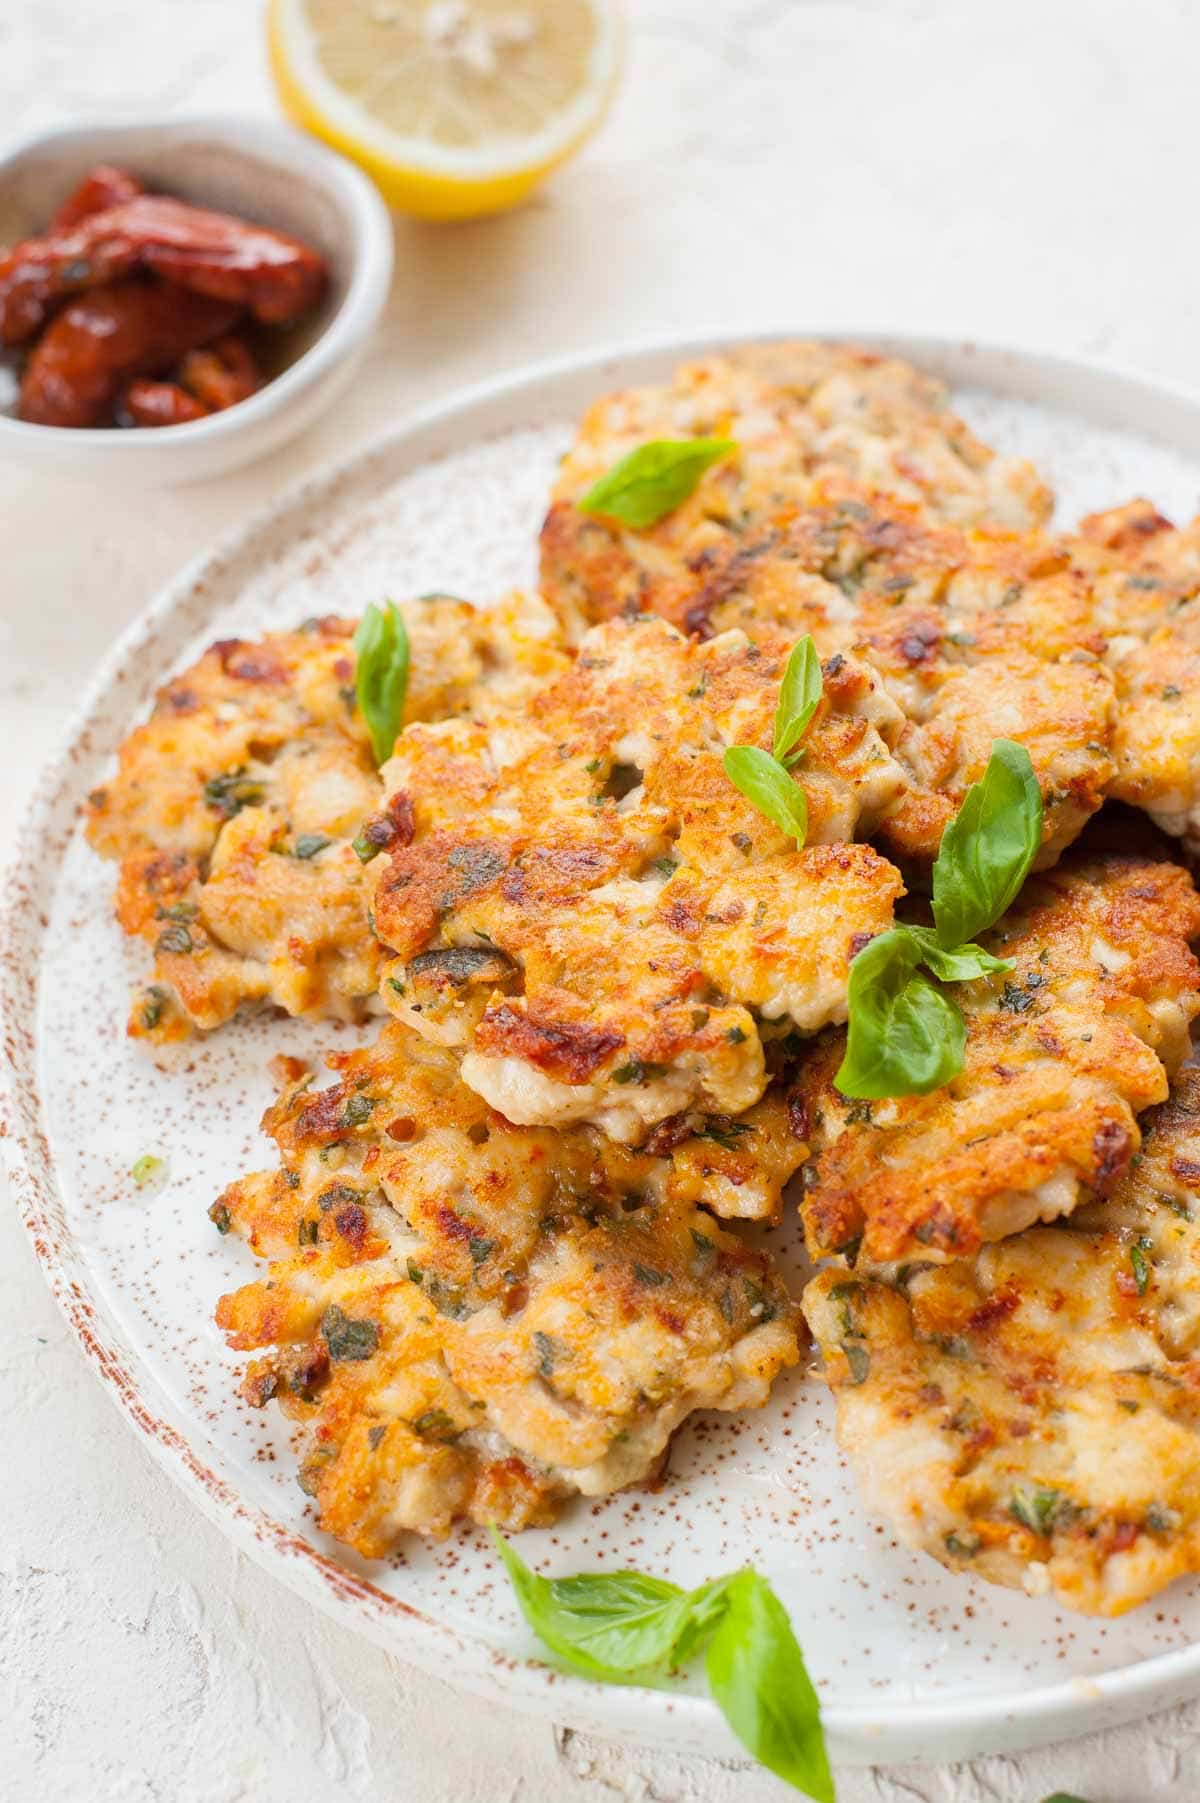 Chicken fritters with sun-dried tomatoes and basil on a white plate.